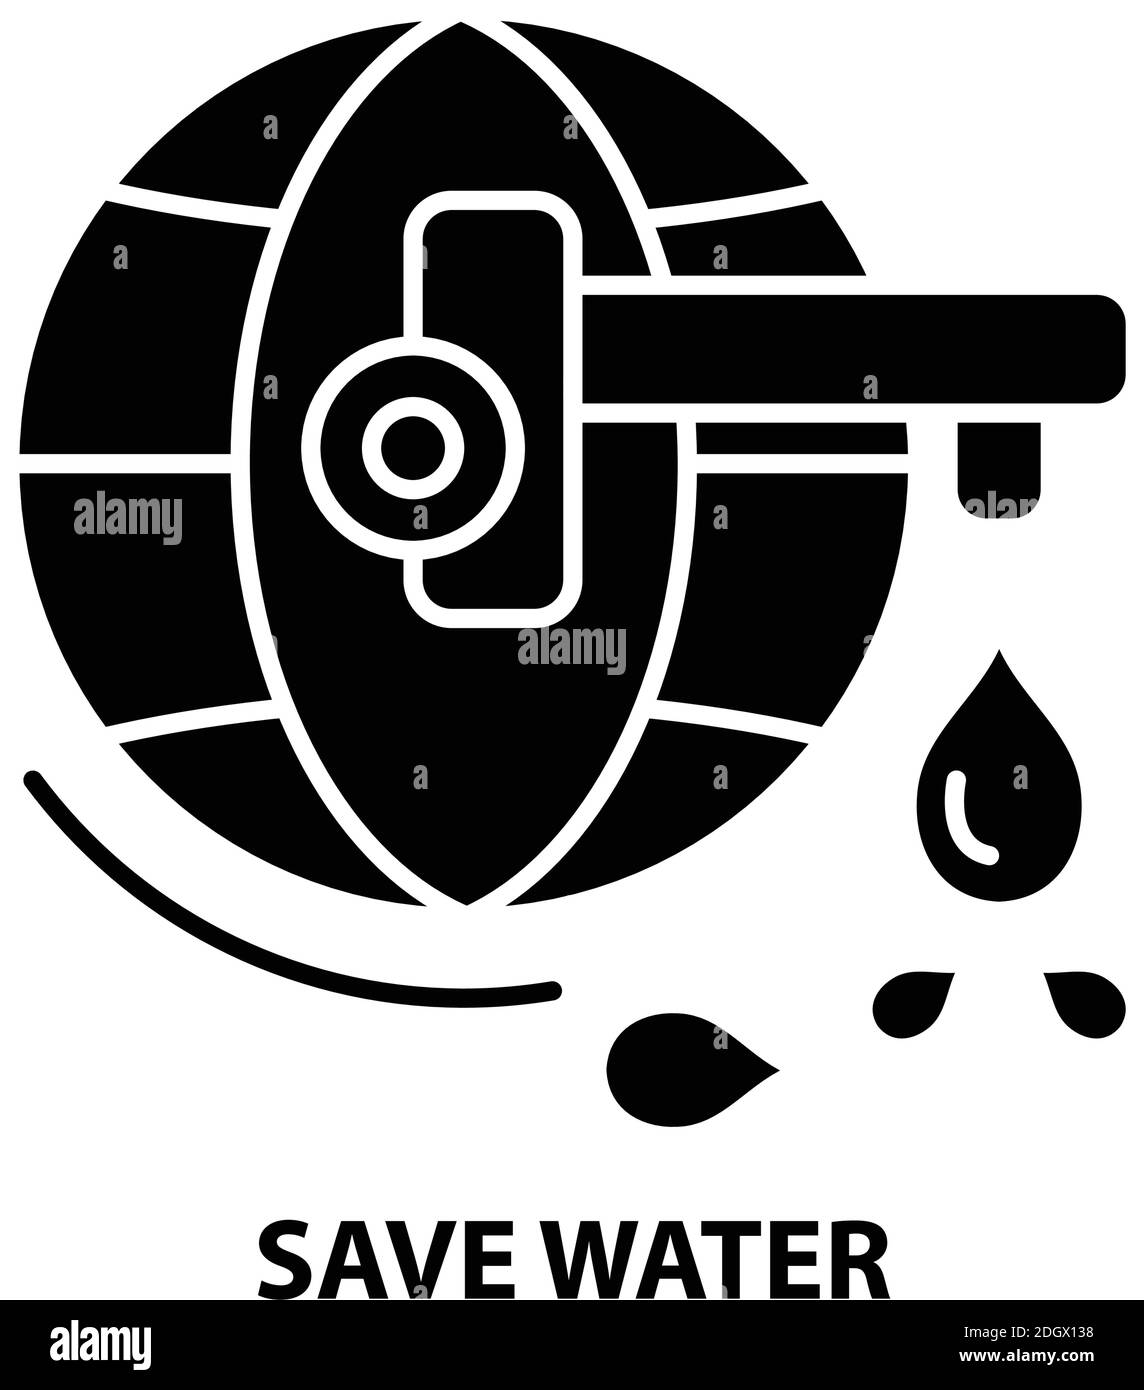 save water icon, black vector sign with editable strokes, concept illustration Stock Vector